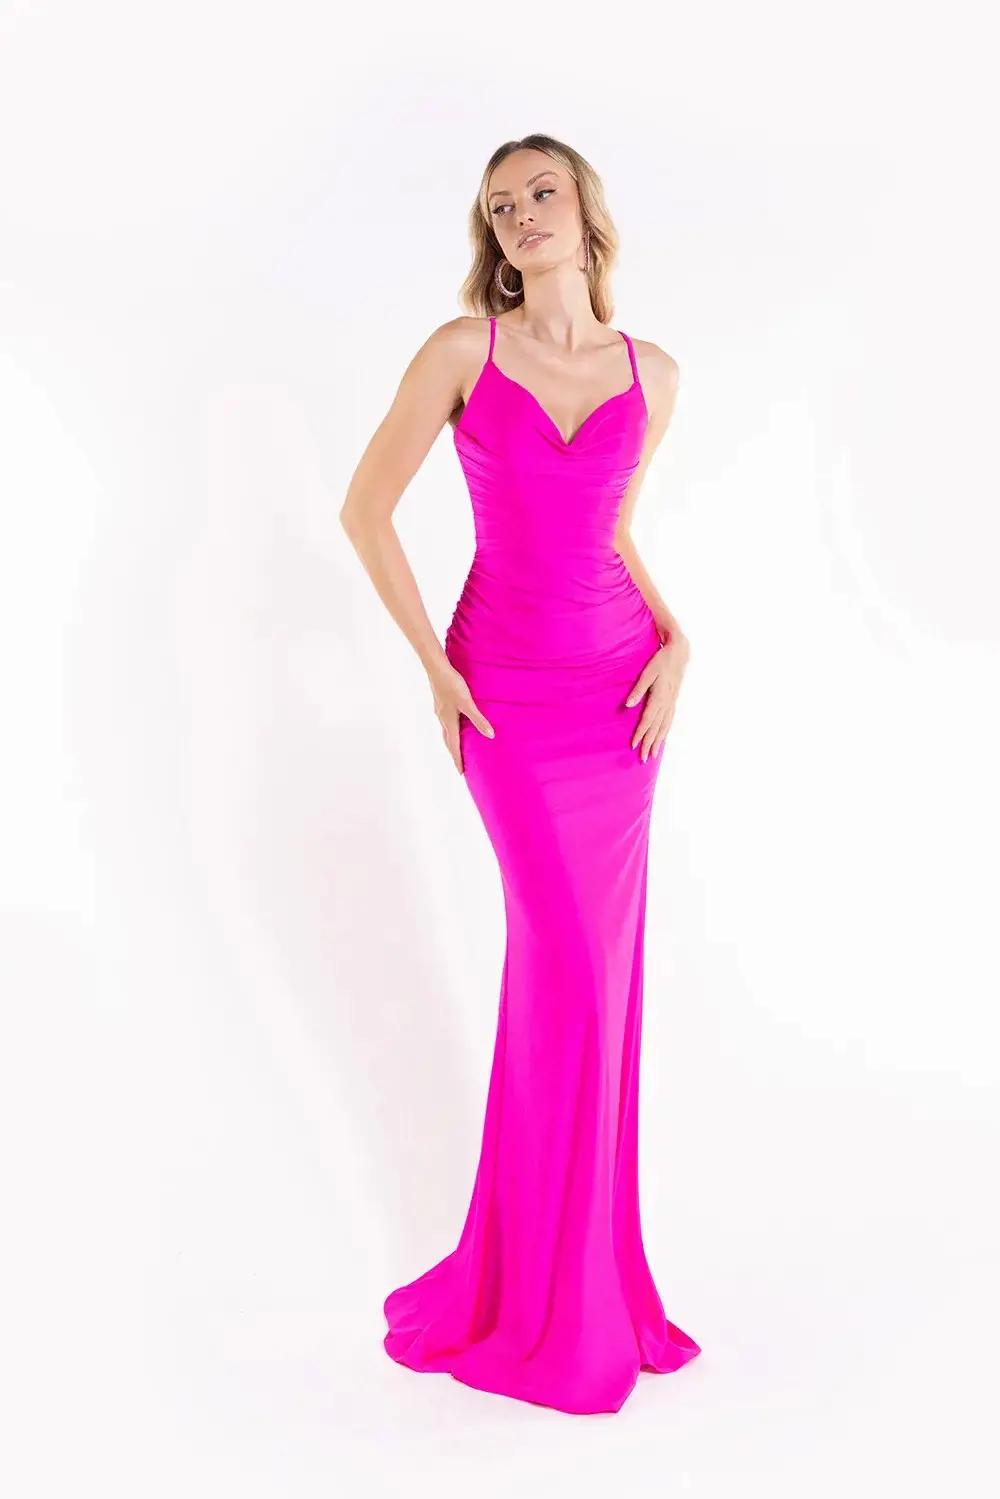 Model wearing a Abby Paris Spring rosy gown